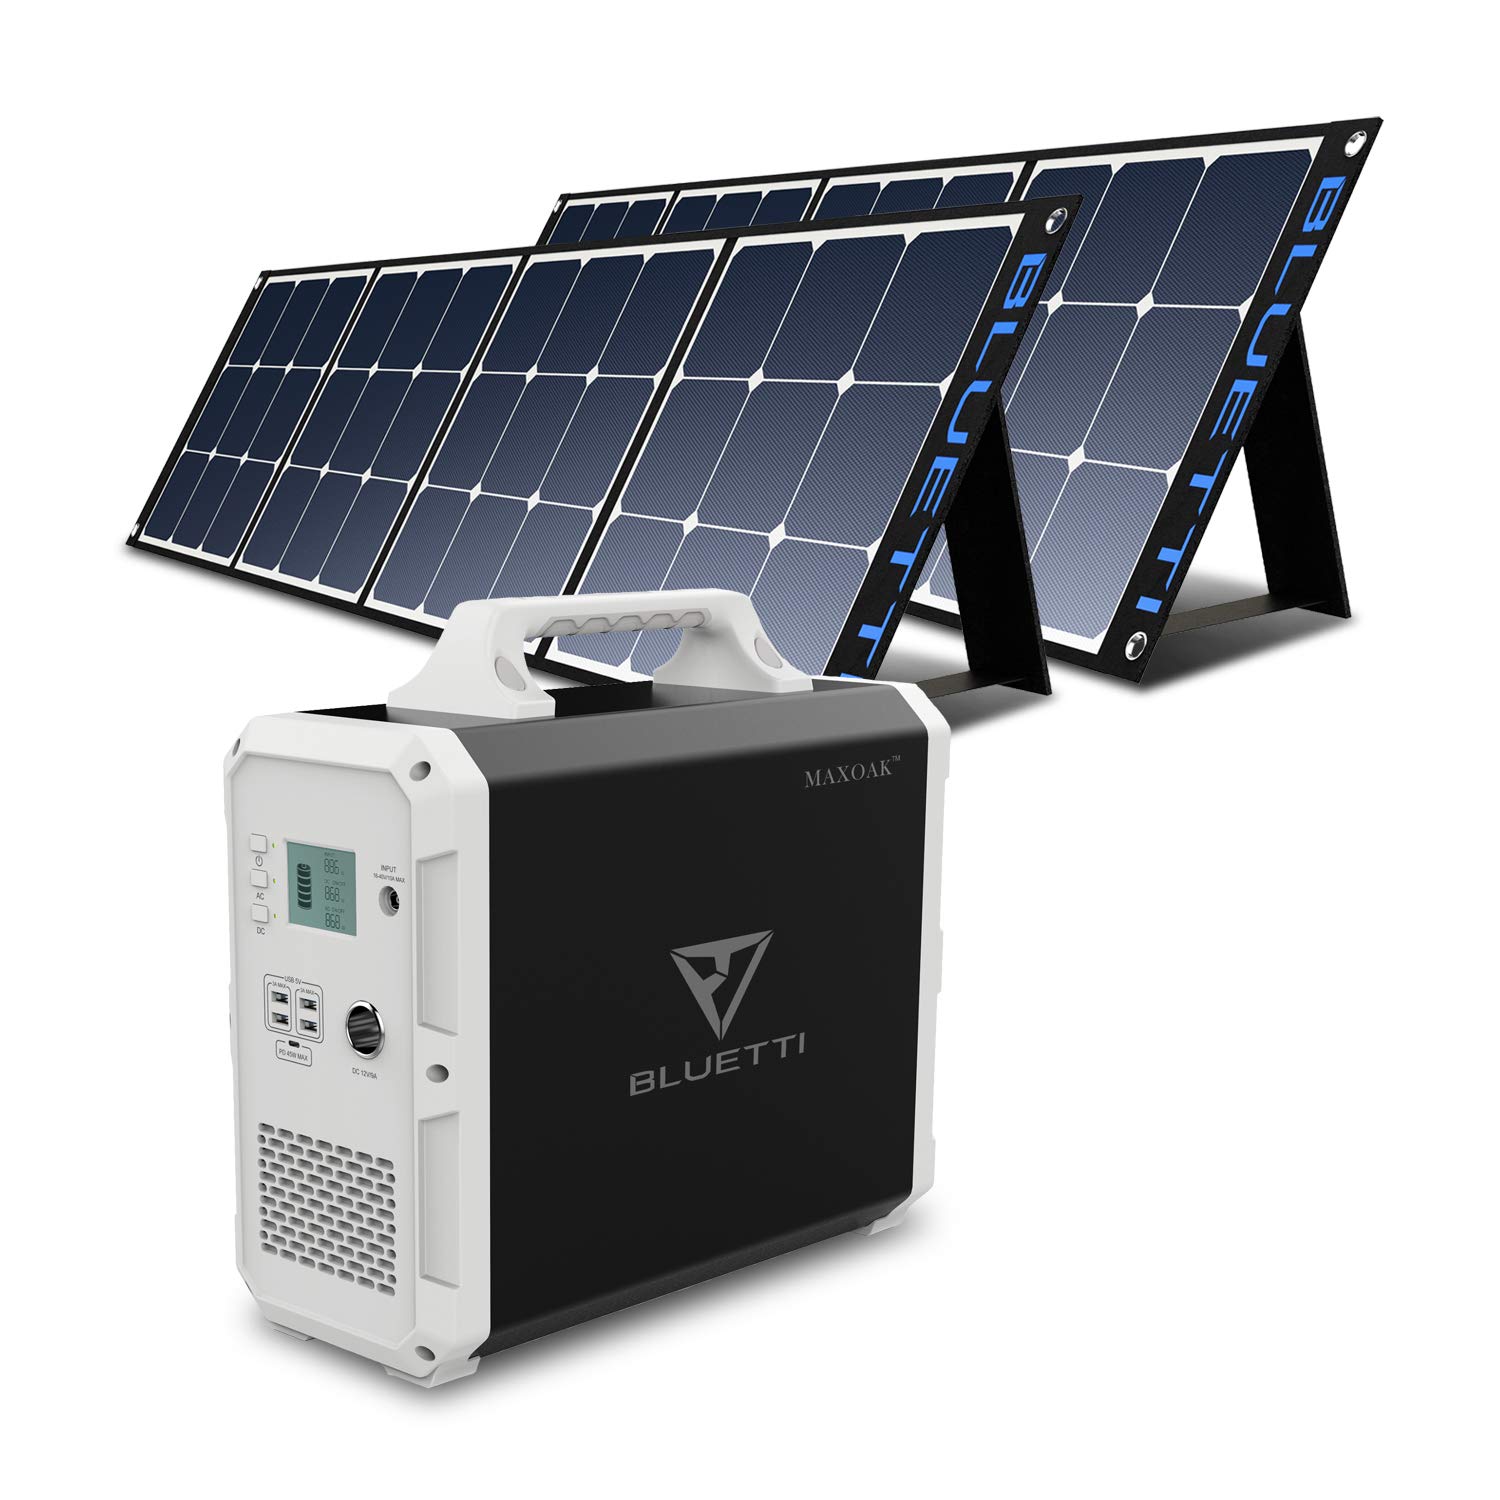 BLUETTI EB150 Solar Generator with 2PCS 200W Solar Panel SP200 Included,Portable Power Station 1000W AC Inverter for Home Use Lithium Battery Backup Solar Bundle Kit for Power Outage Outdoor Camping